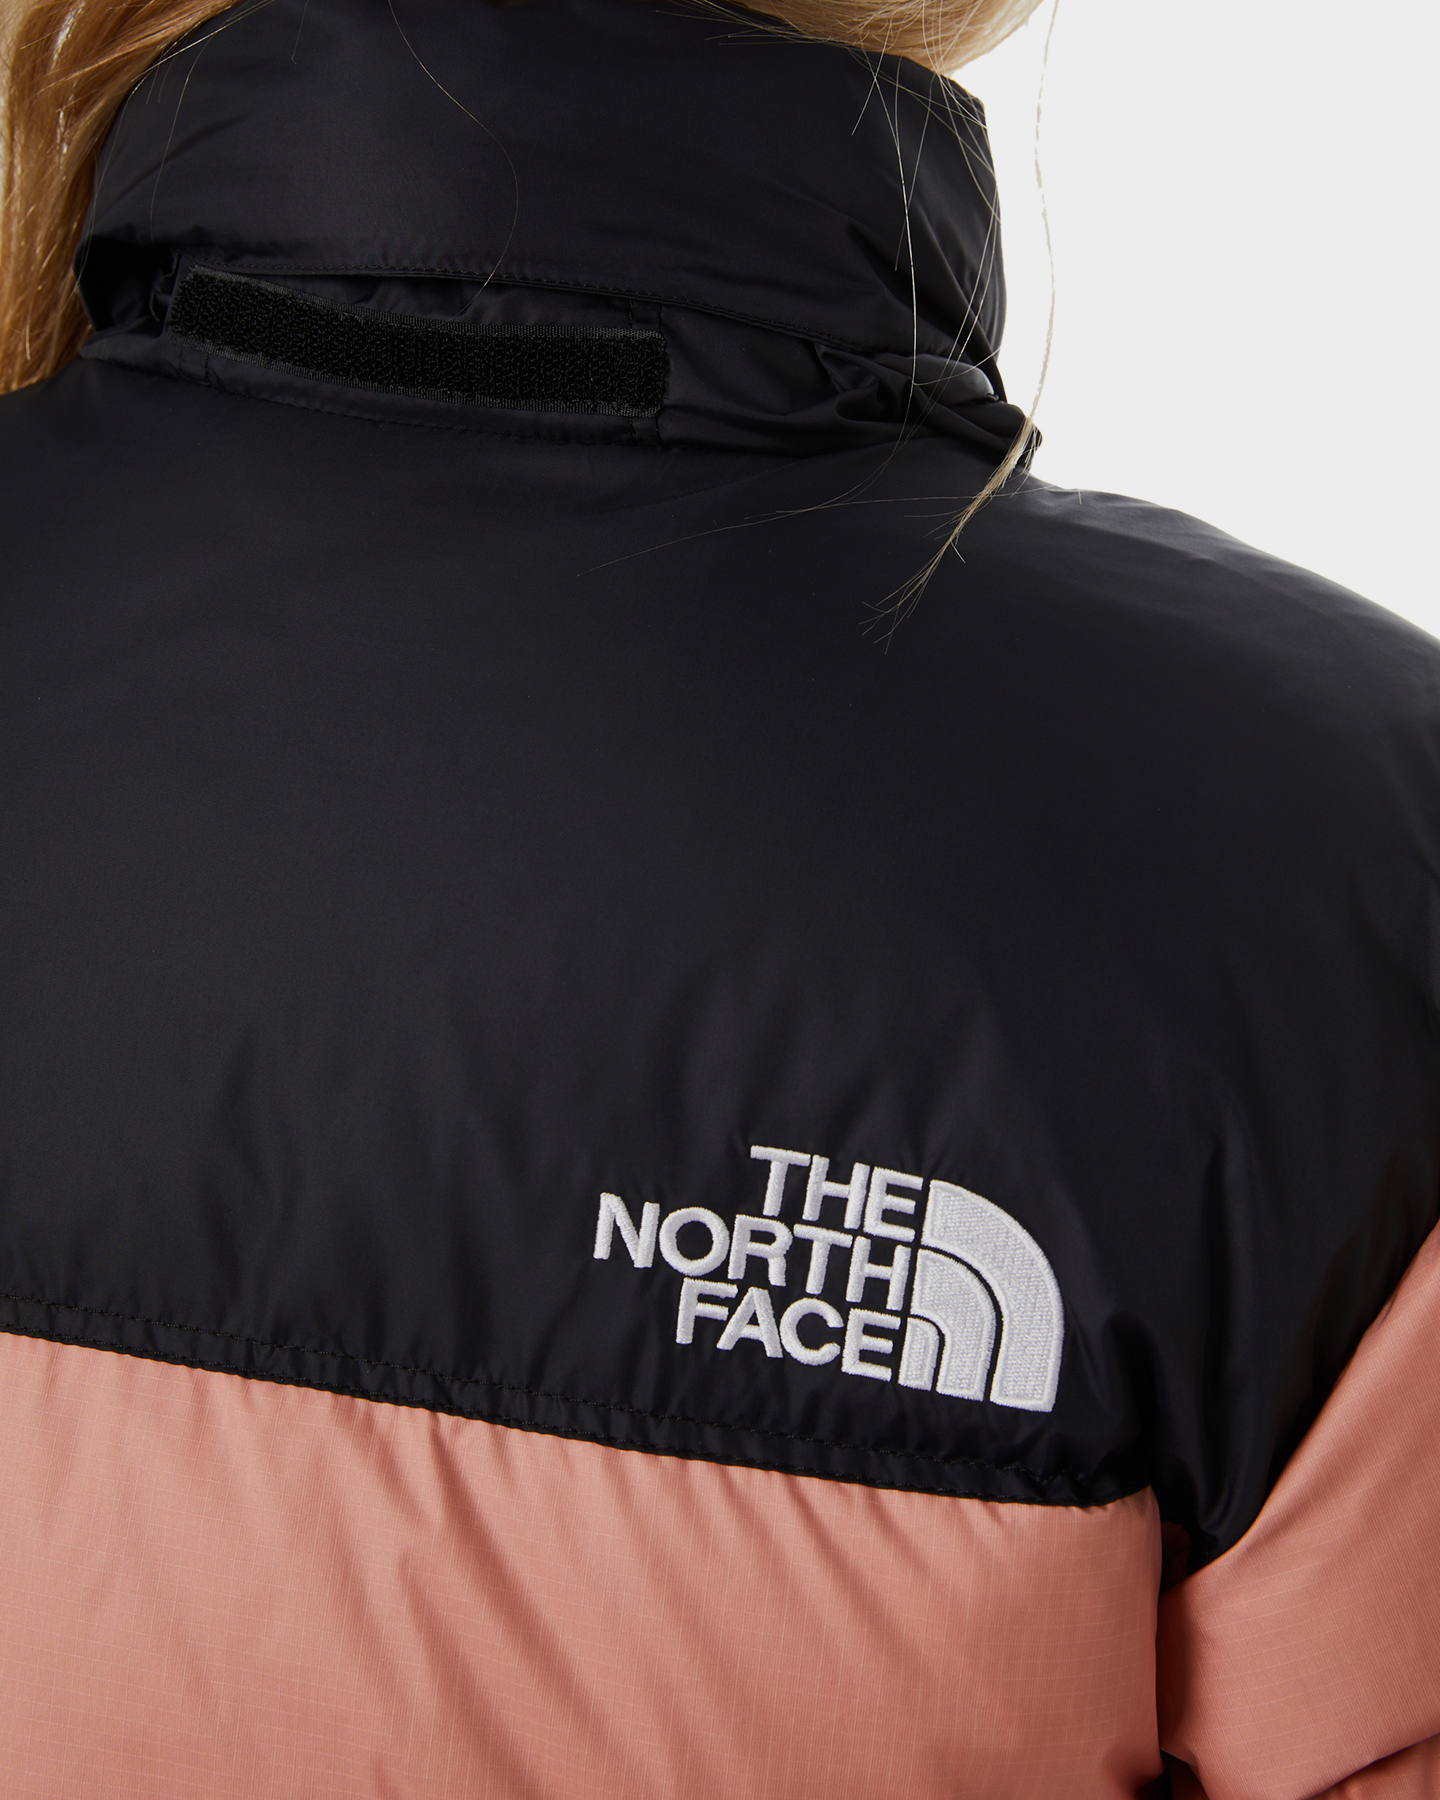 The North Face Womens 1996 Retro Nuptse Jacket - Rose Dawn | SurfStitch